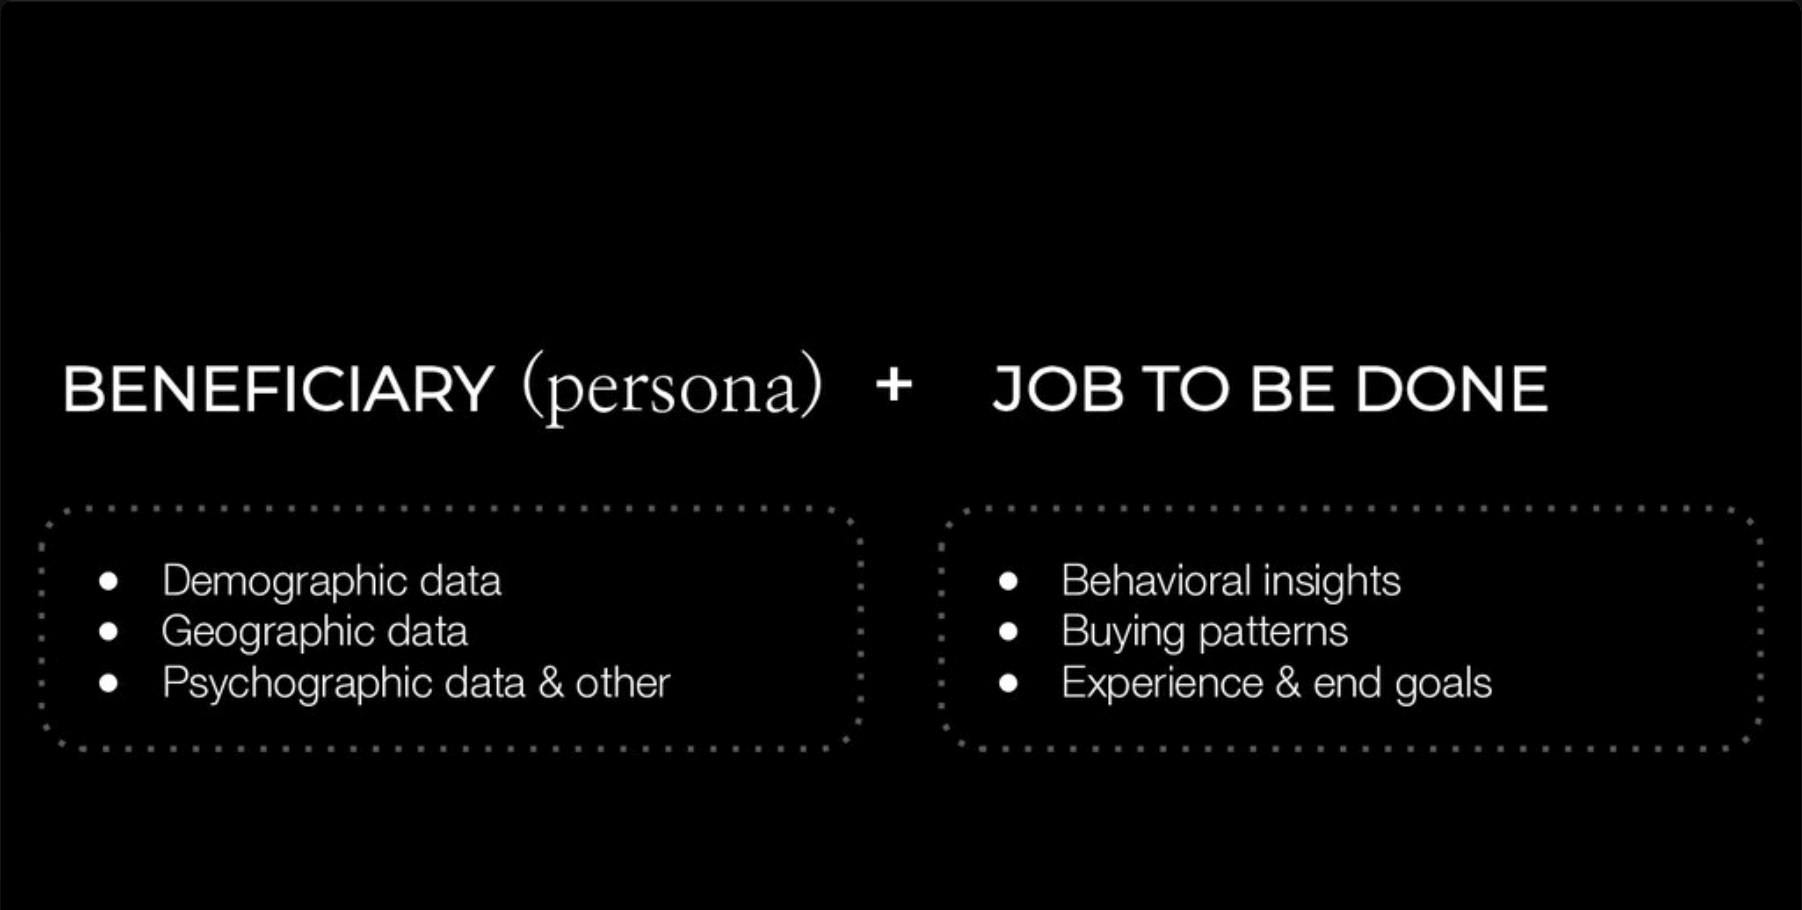 Combine the beneficiary (persona) with job to be done.